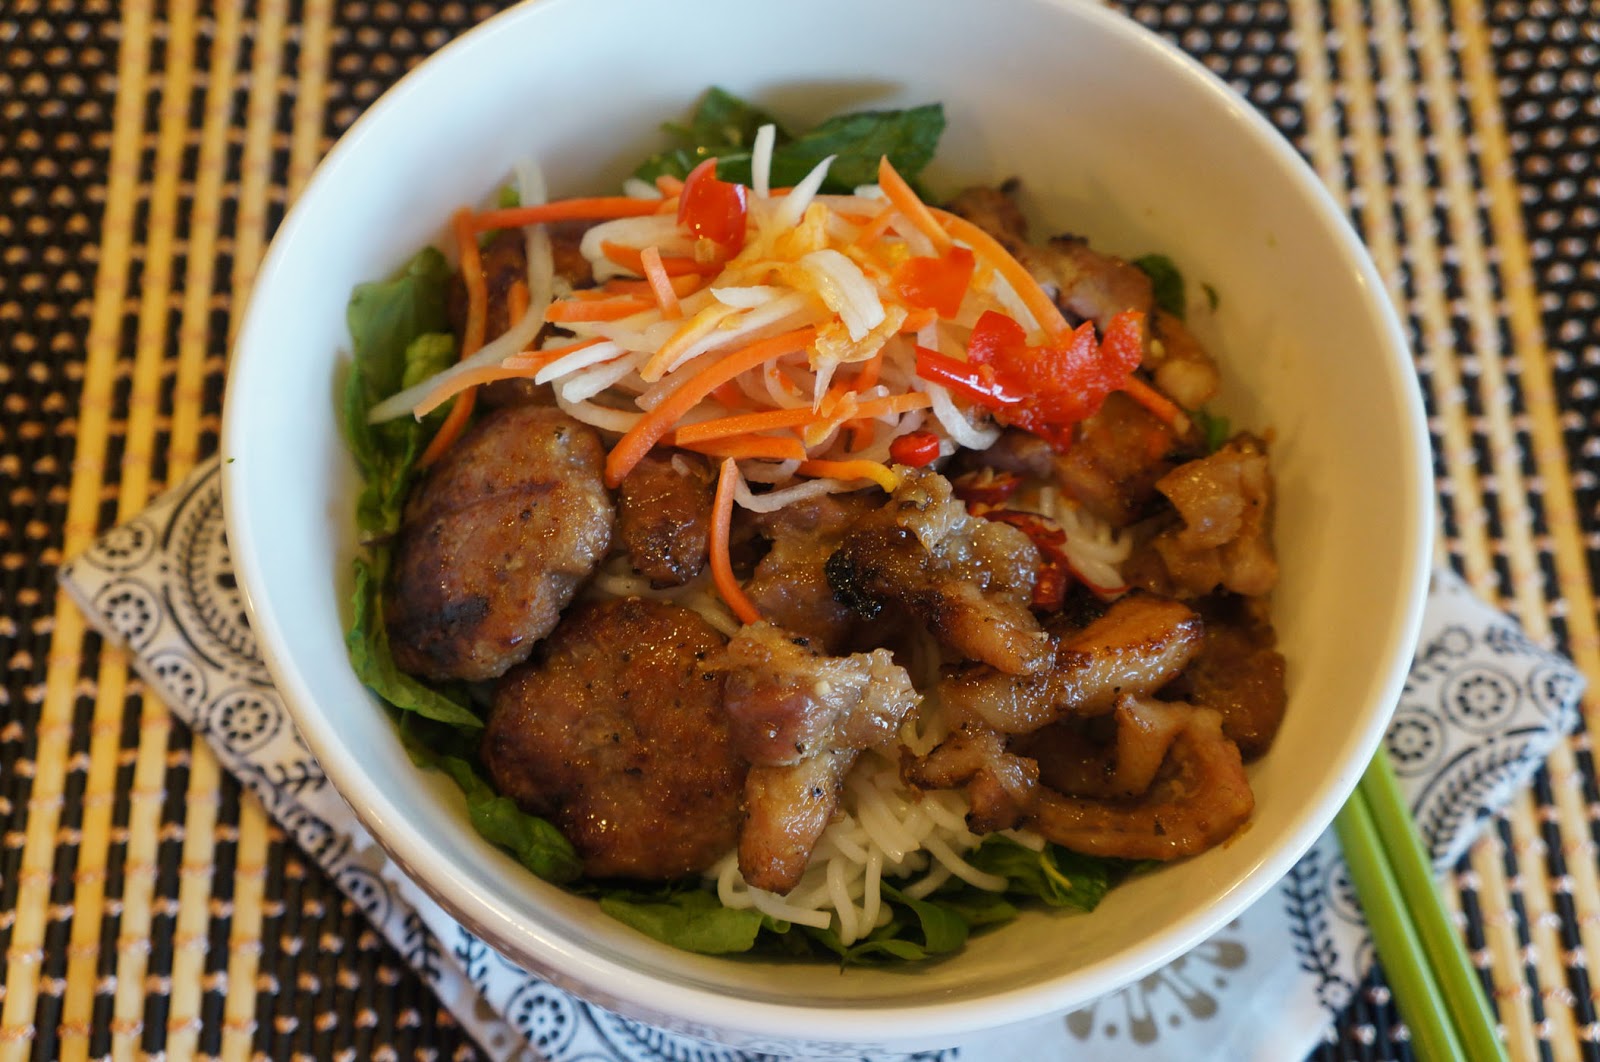 Gourmet by Kat: Vietnamese vermicelli with Barbecued Pork (Bun cha thit ...